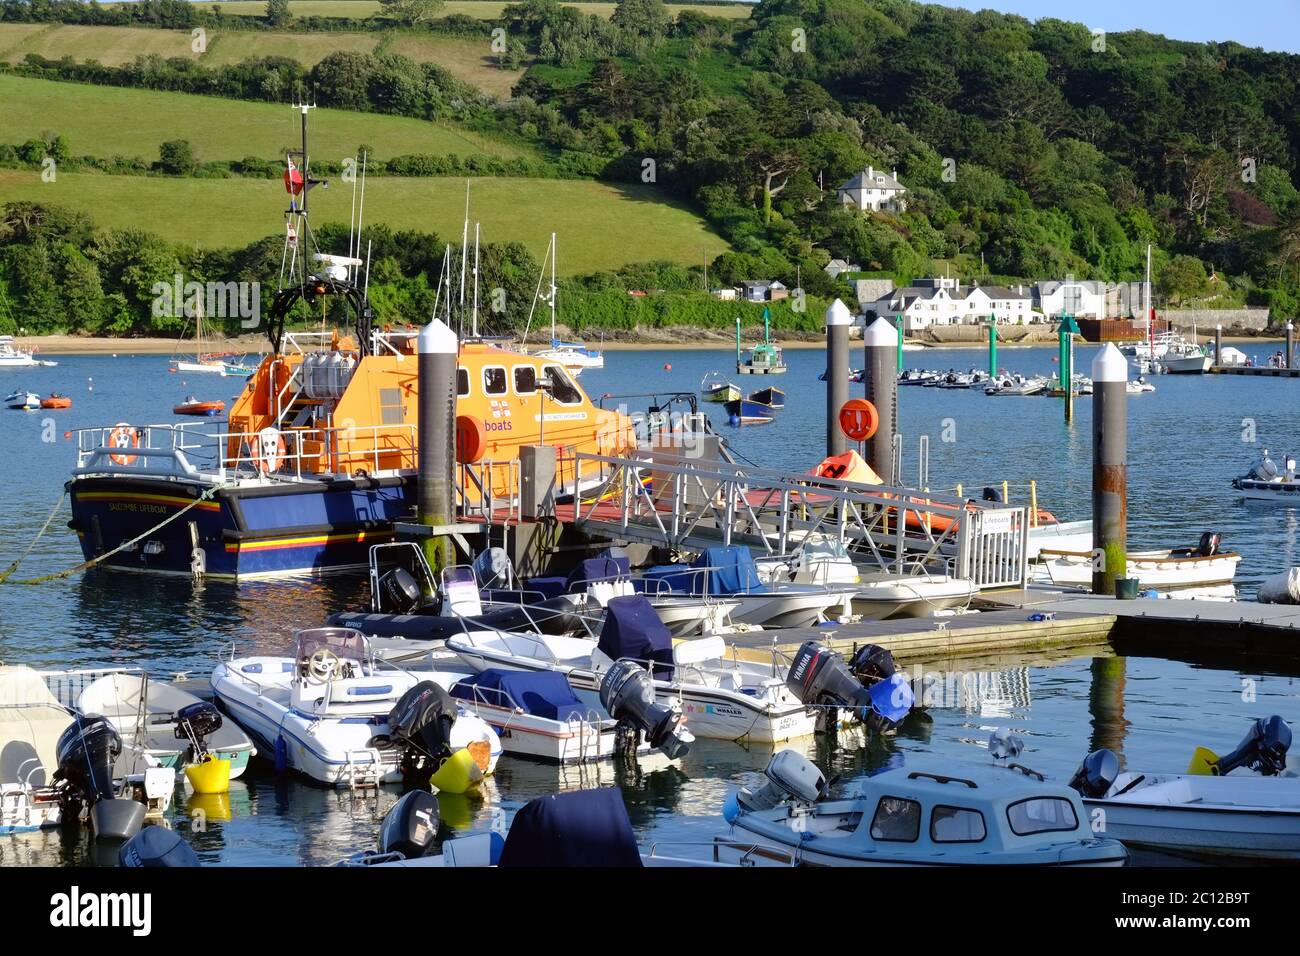 RNLI offshore lifeboat 'The Baltic Exchange III' on its mooring in Salcombe in the South Hams, Devon, England, UK. Stock Photo